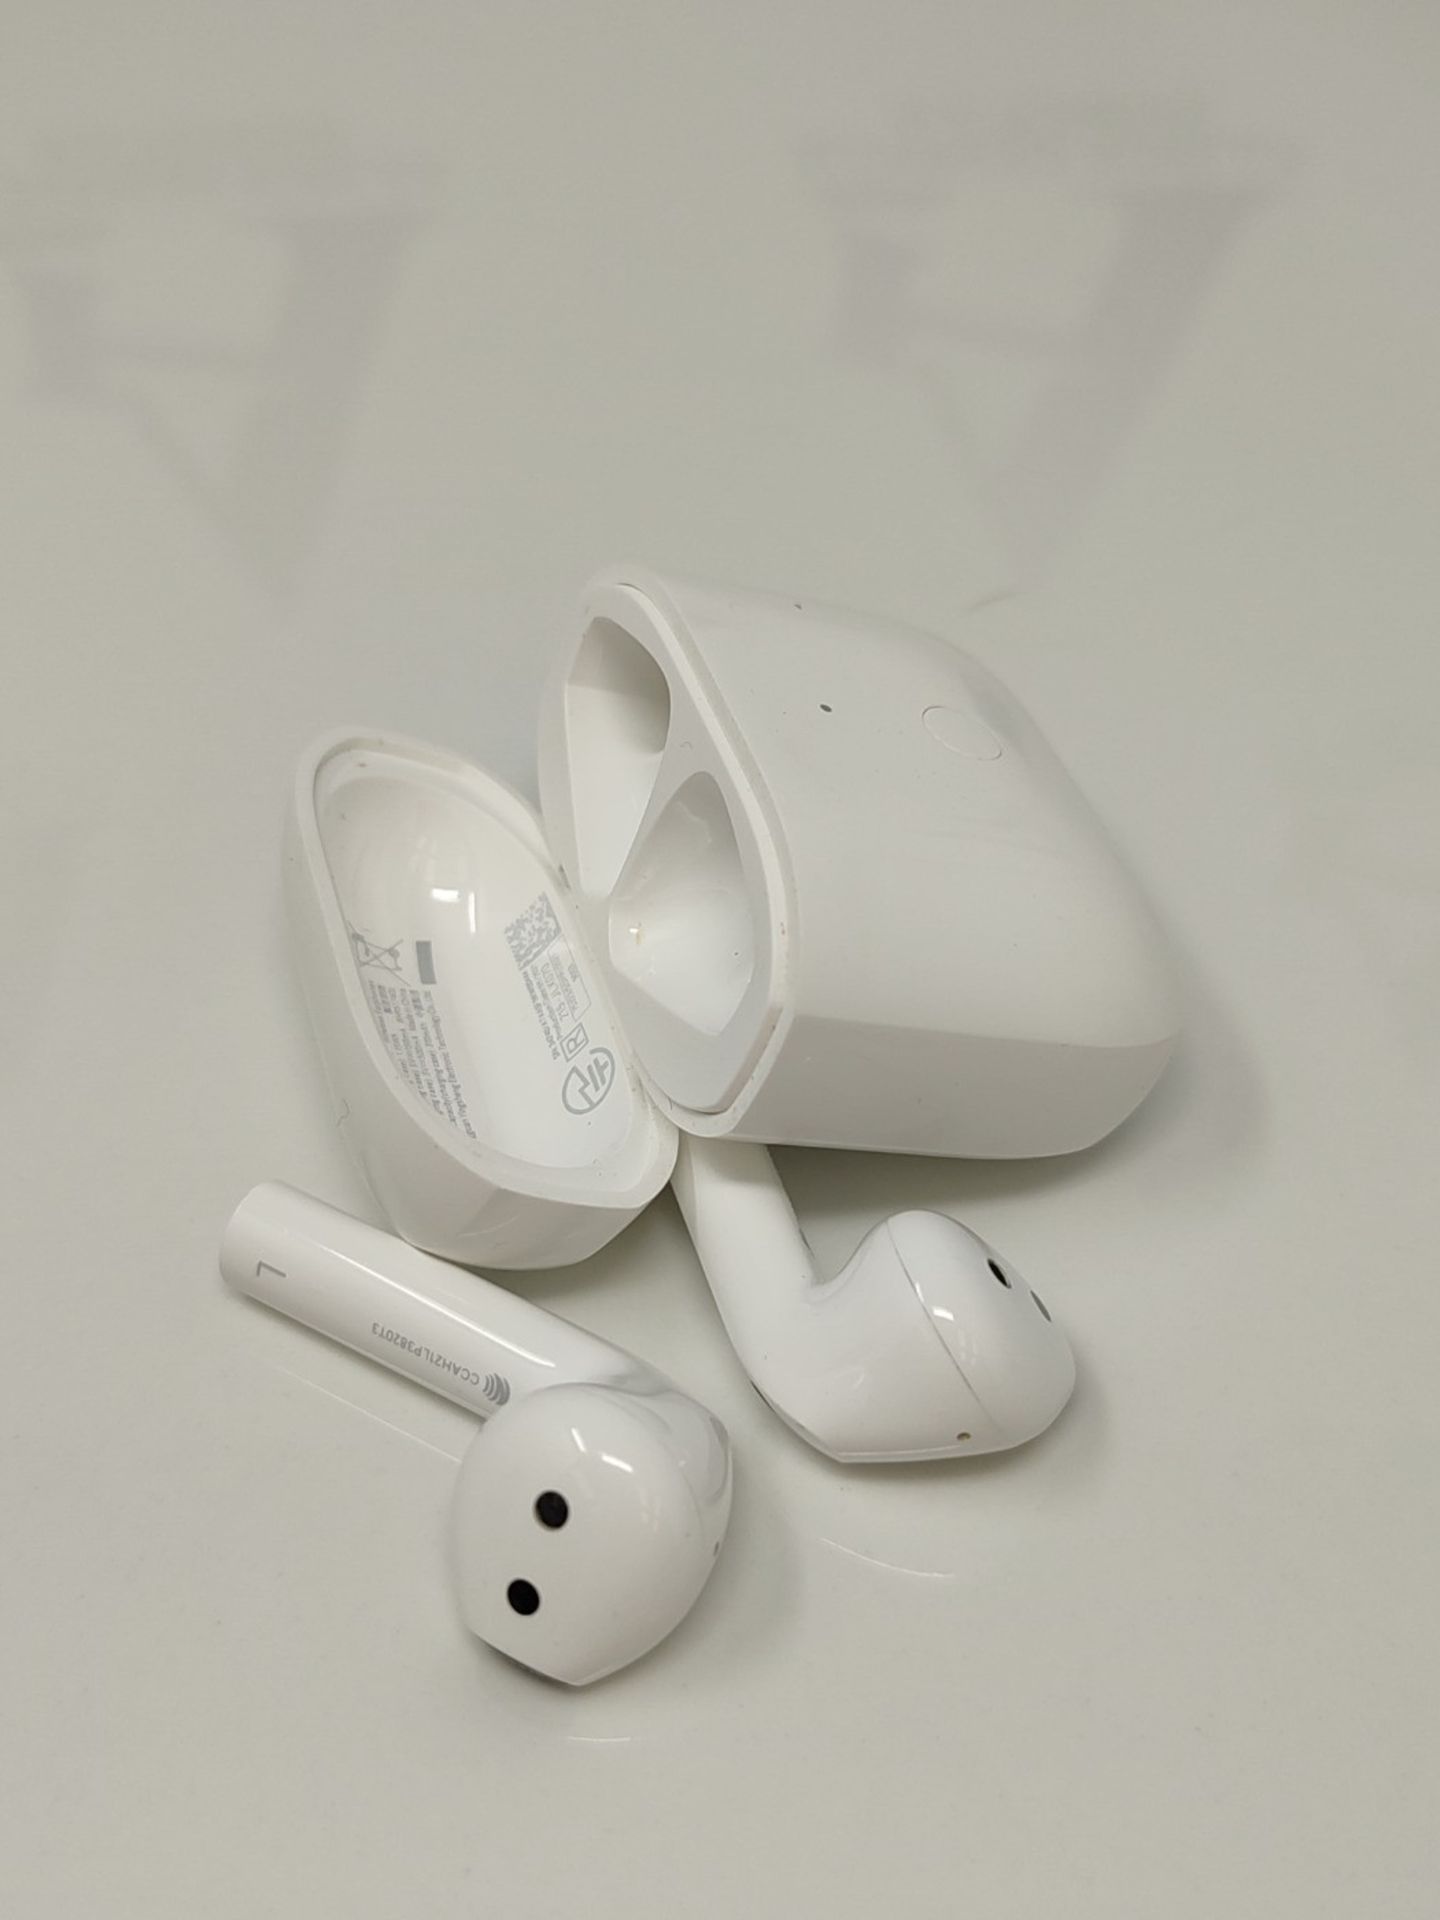 Xiaomi Redmi Buds 3 Wireless Earbuds, Qualcomm QCC3040 BLUETOOTH chipset, 12mm dynamic - Image 3 of 3